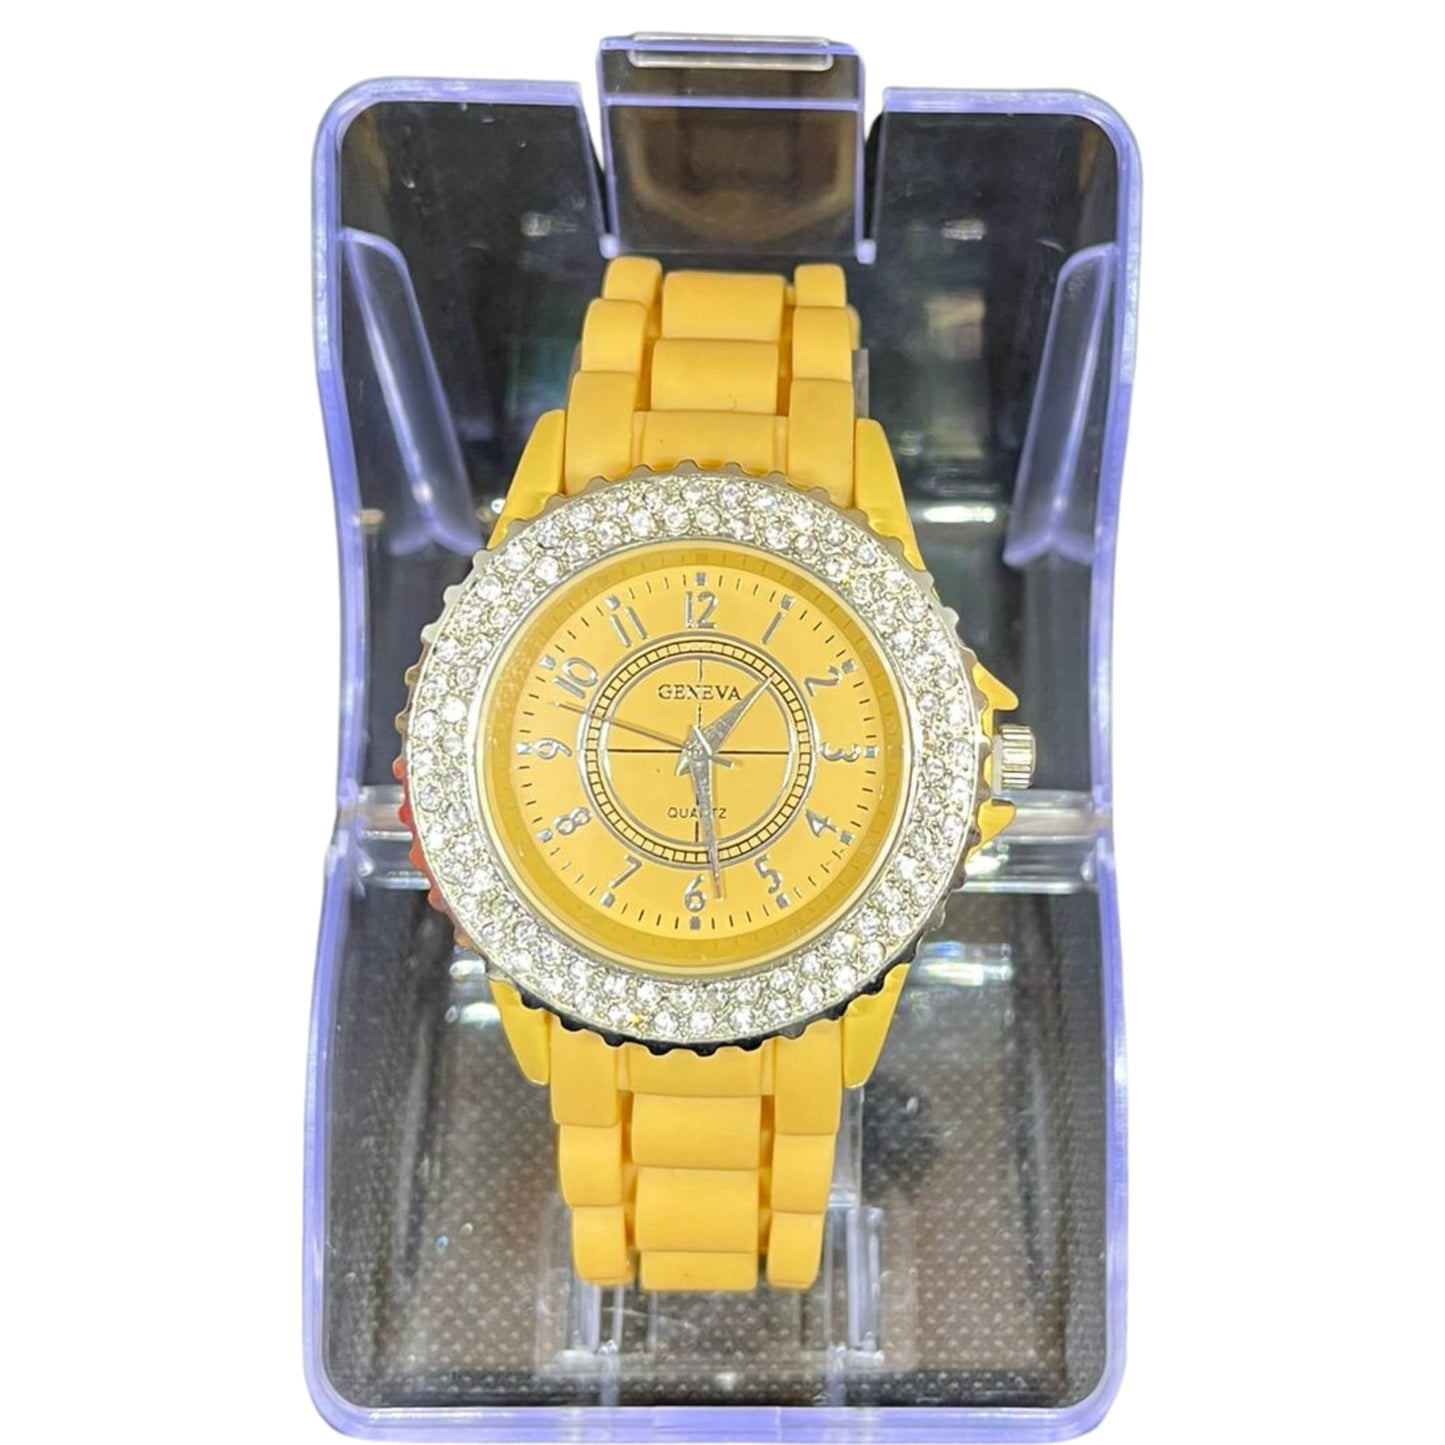 BBG Women's Watch with Silver Lining, Yellow Color, 1 Pc per Pack